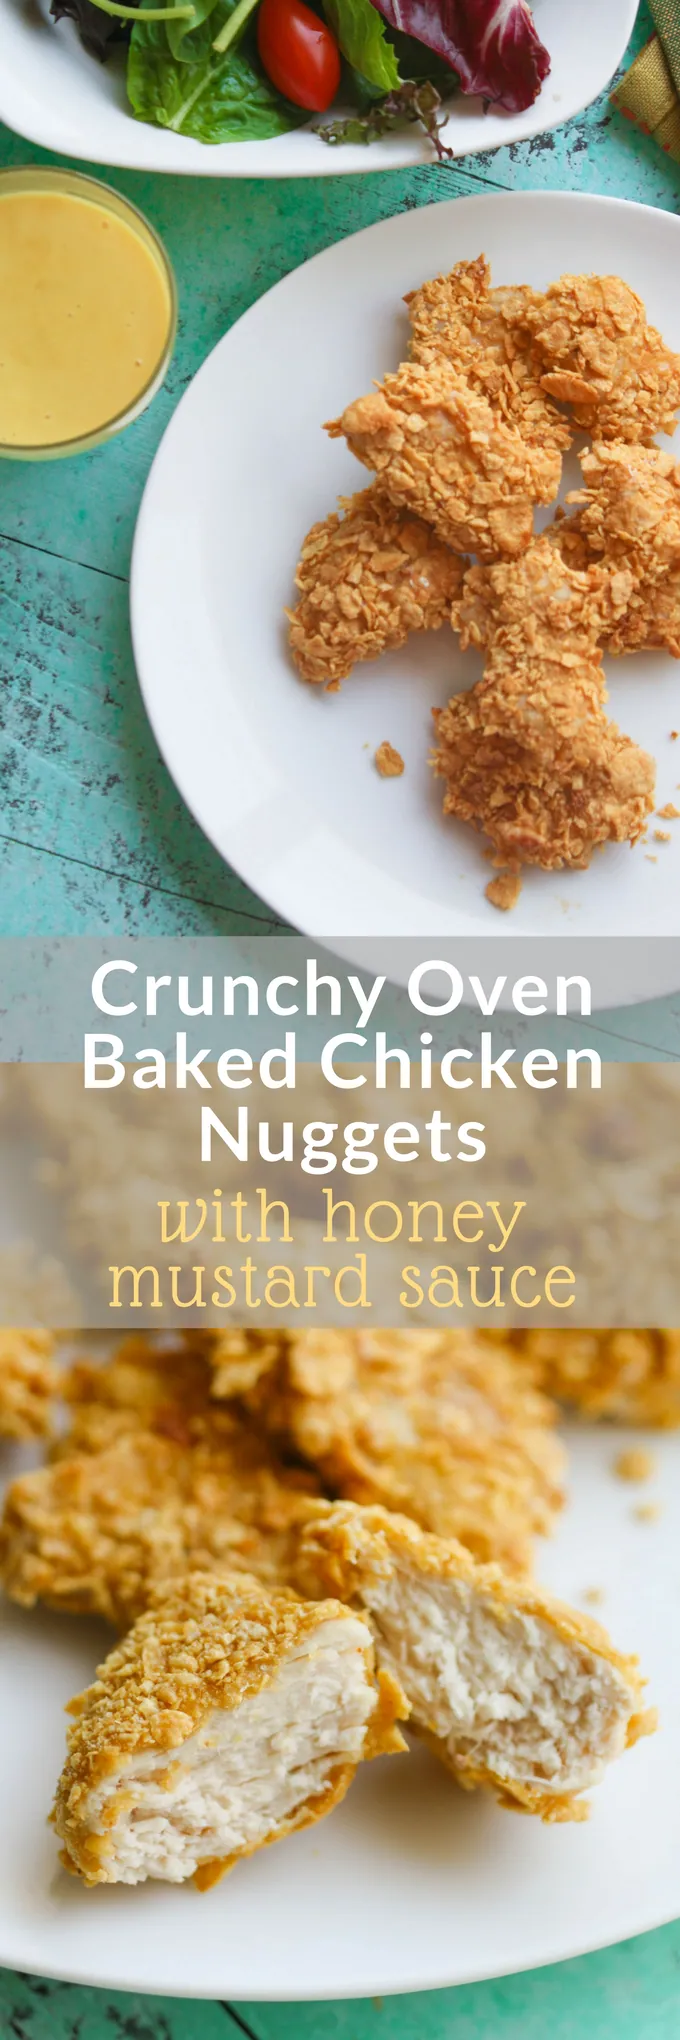 Crunchy Oven Baked Chicken Nuggets with Honey Mustard Sauce are easy to make for lunch or dinner. No fast food lane needed!